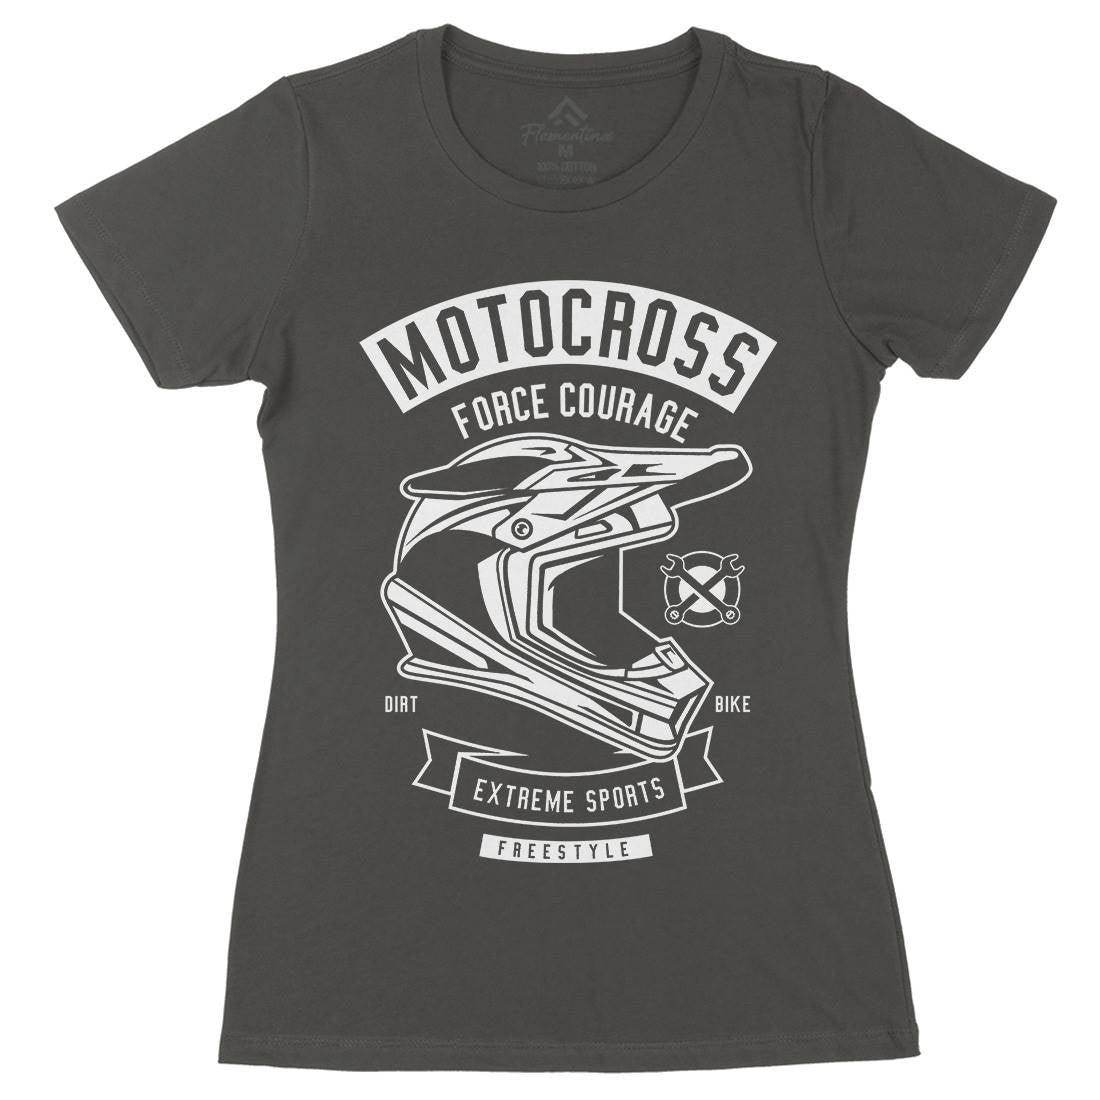 Motocross Force Courage Womens Organic Crew Neck T-Shirt Motorcycles B576